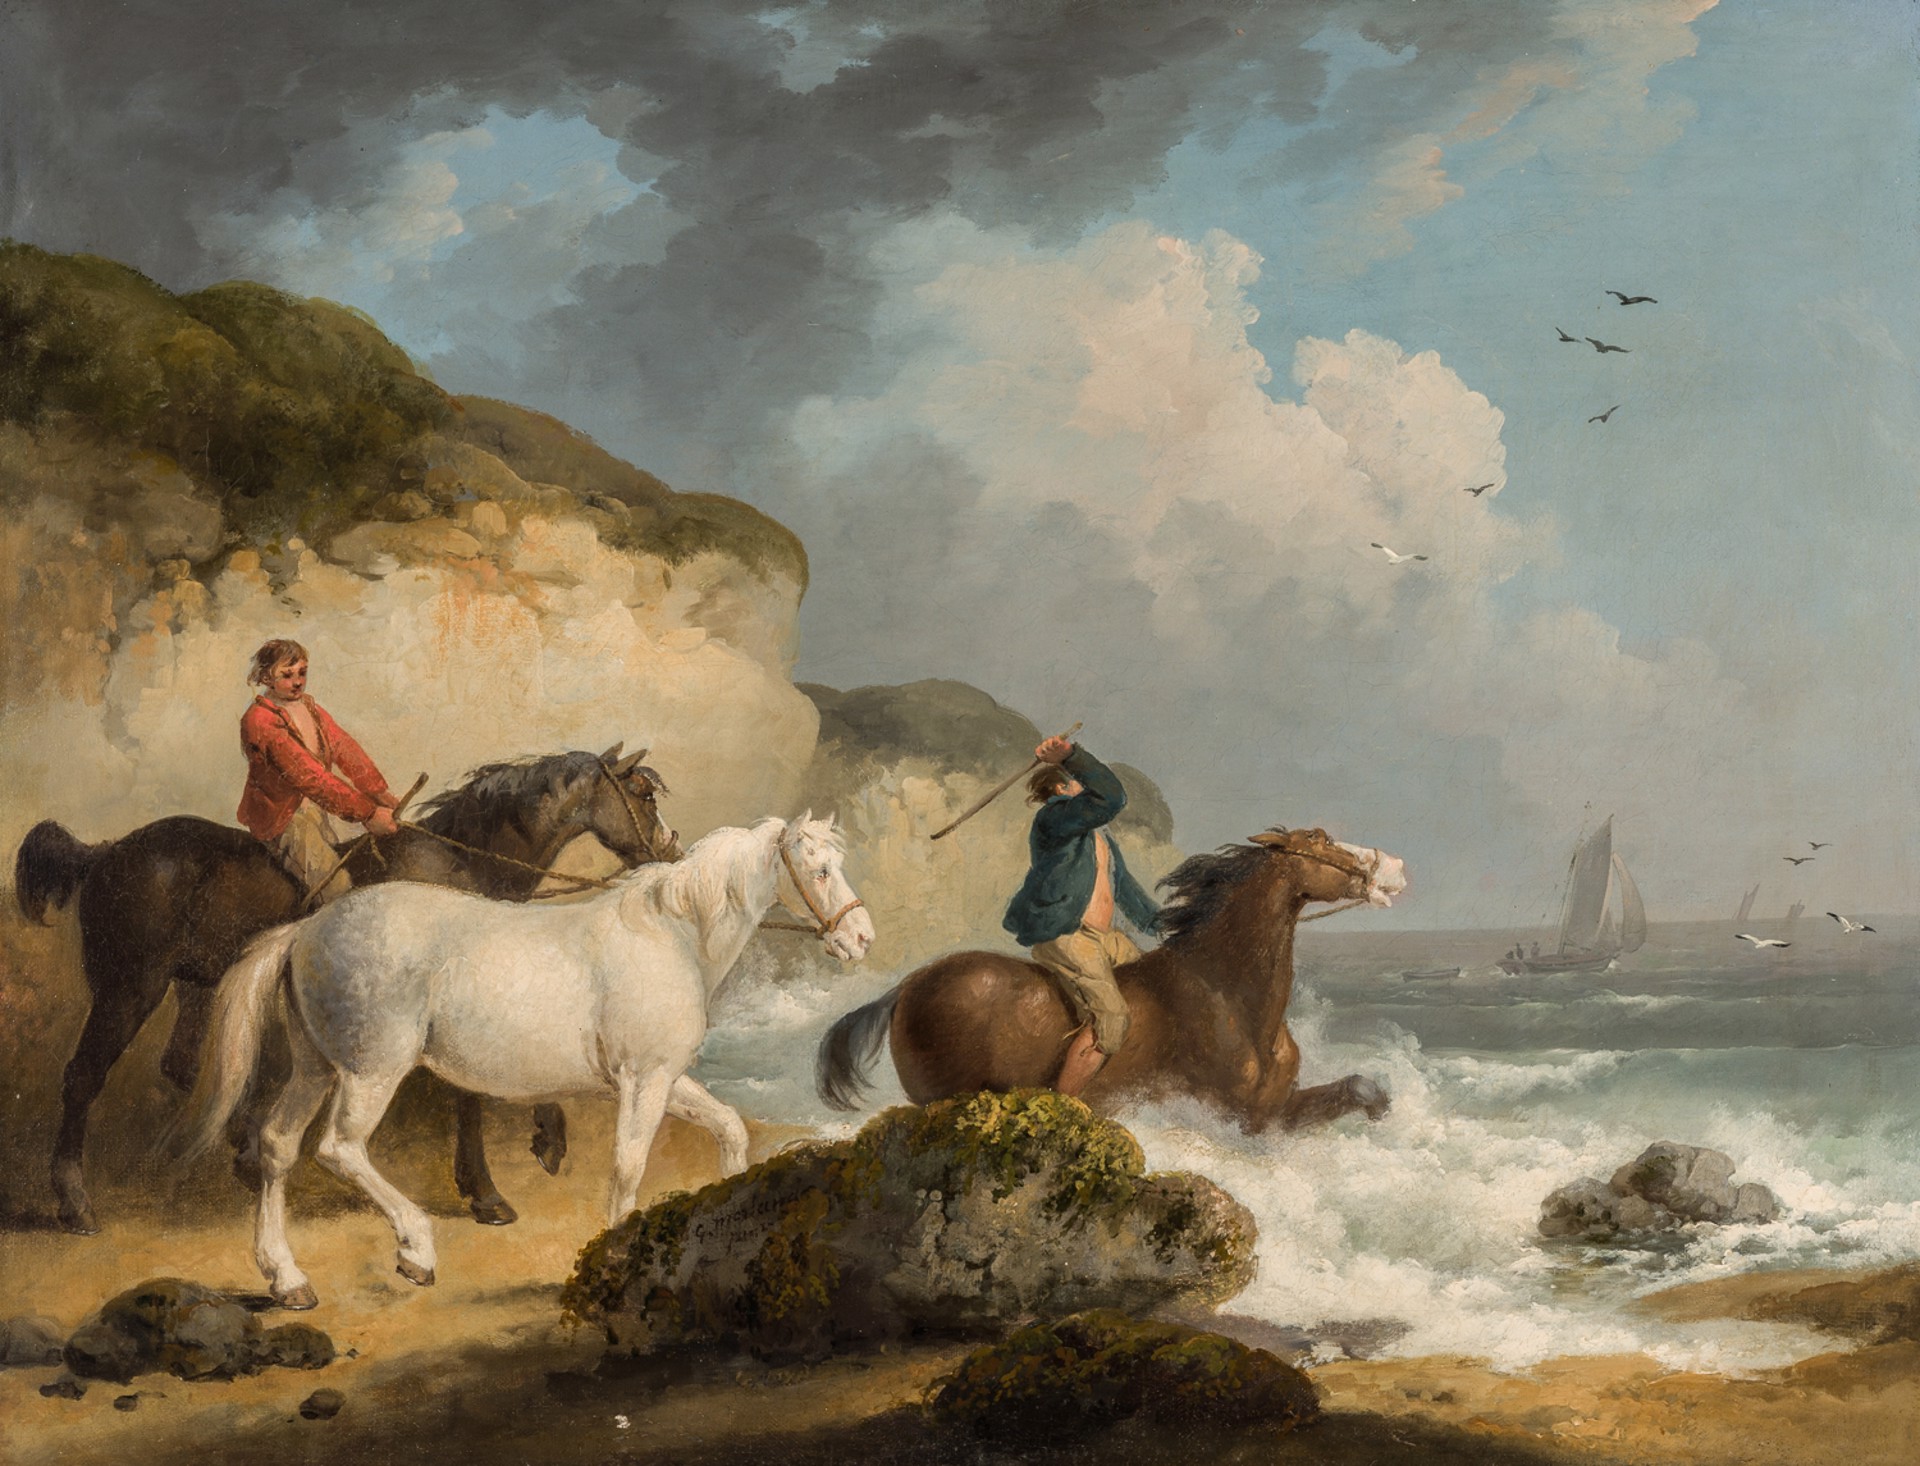 HORSES BY THE SEA by George Morland